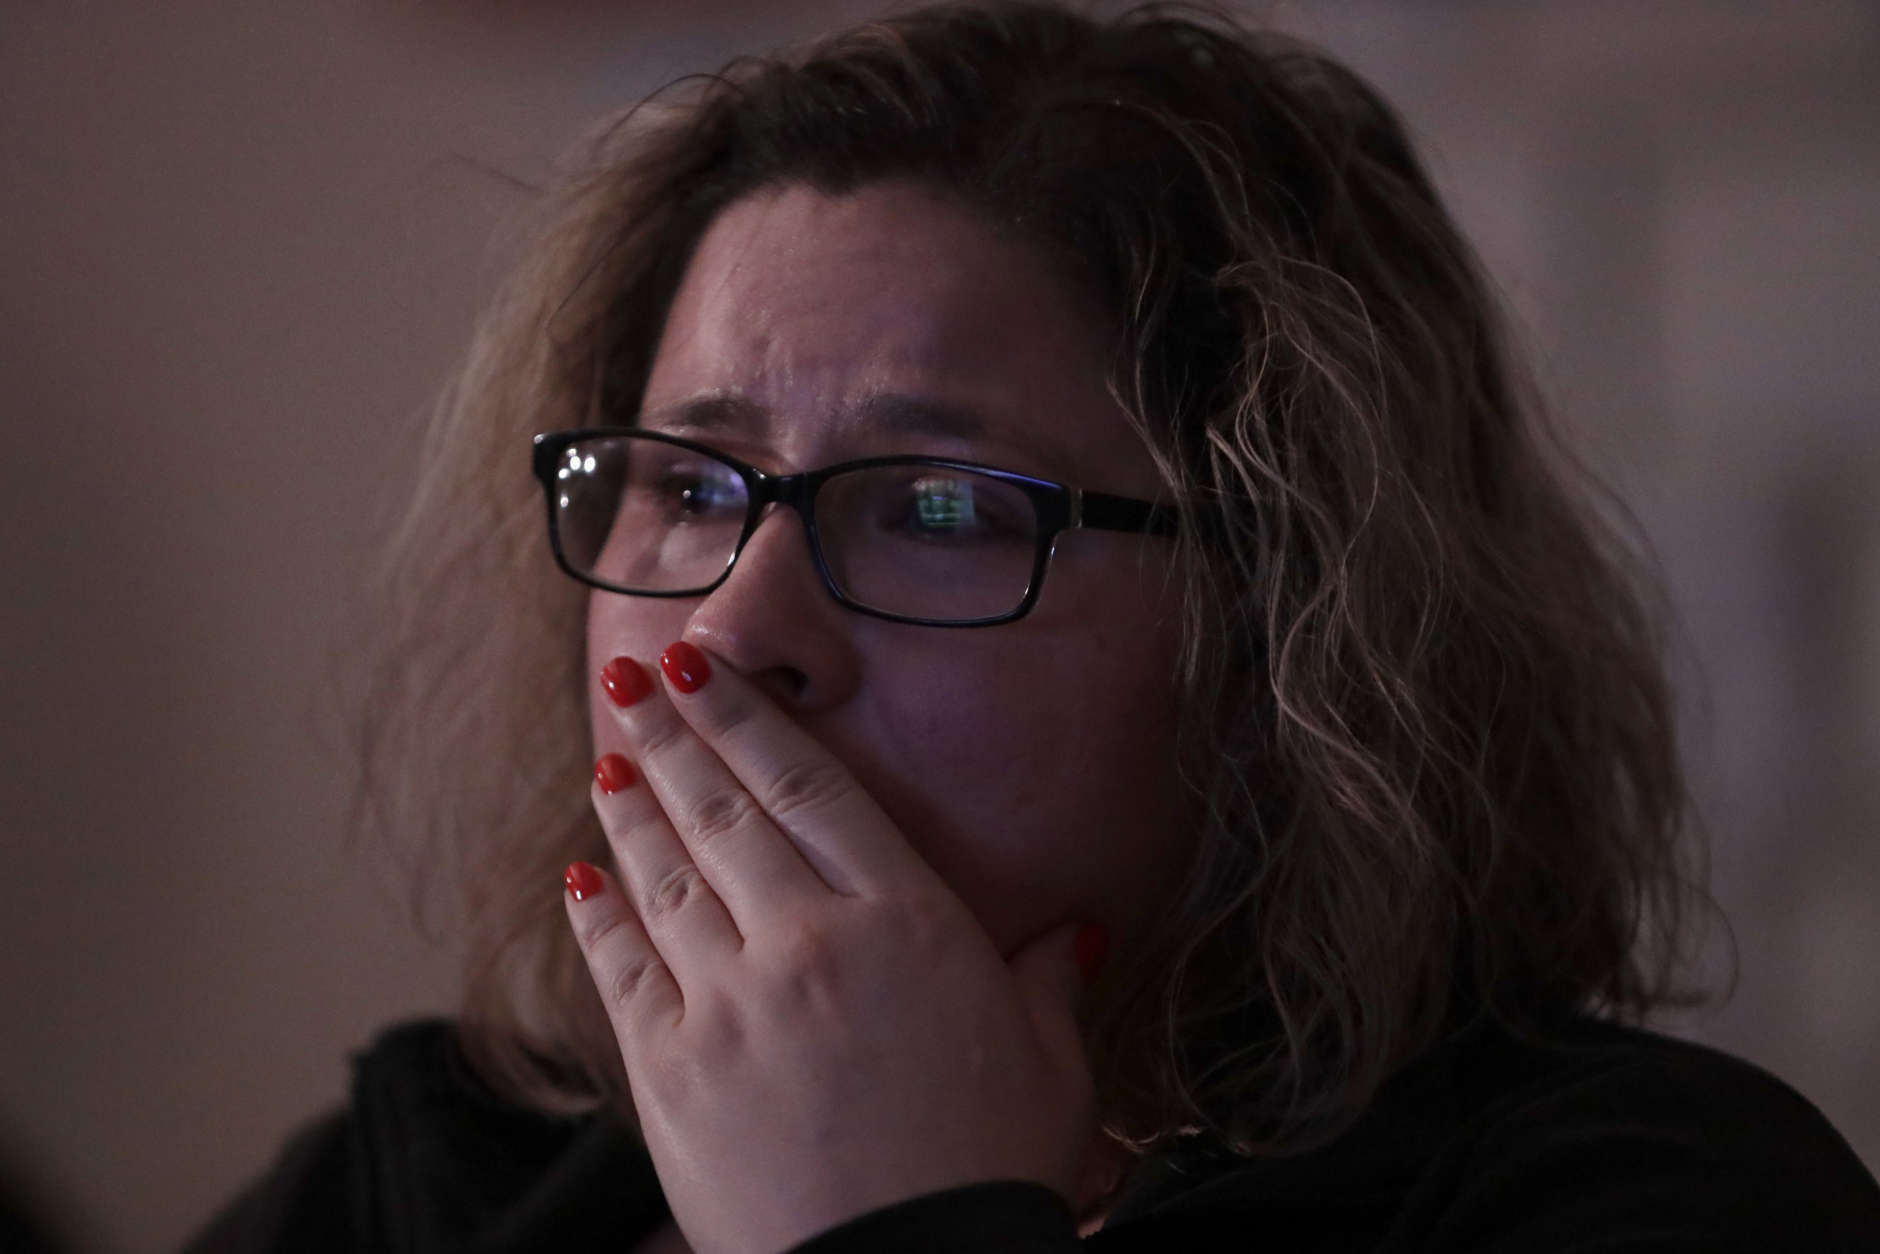 Angelica Magana, 34, a Deferred Action for Childhood Arrivals program recipient who was brought to the United State at the age of eight, reacts to President Donald Trump as he lays out is immigration policy during a State of the Union watch party Tuesday, Jan. 30, 2018, in Chicago. (AP Photo/Charles Rex Arbogast)